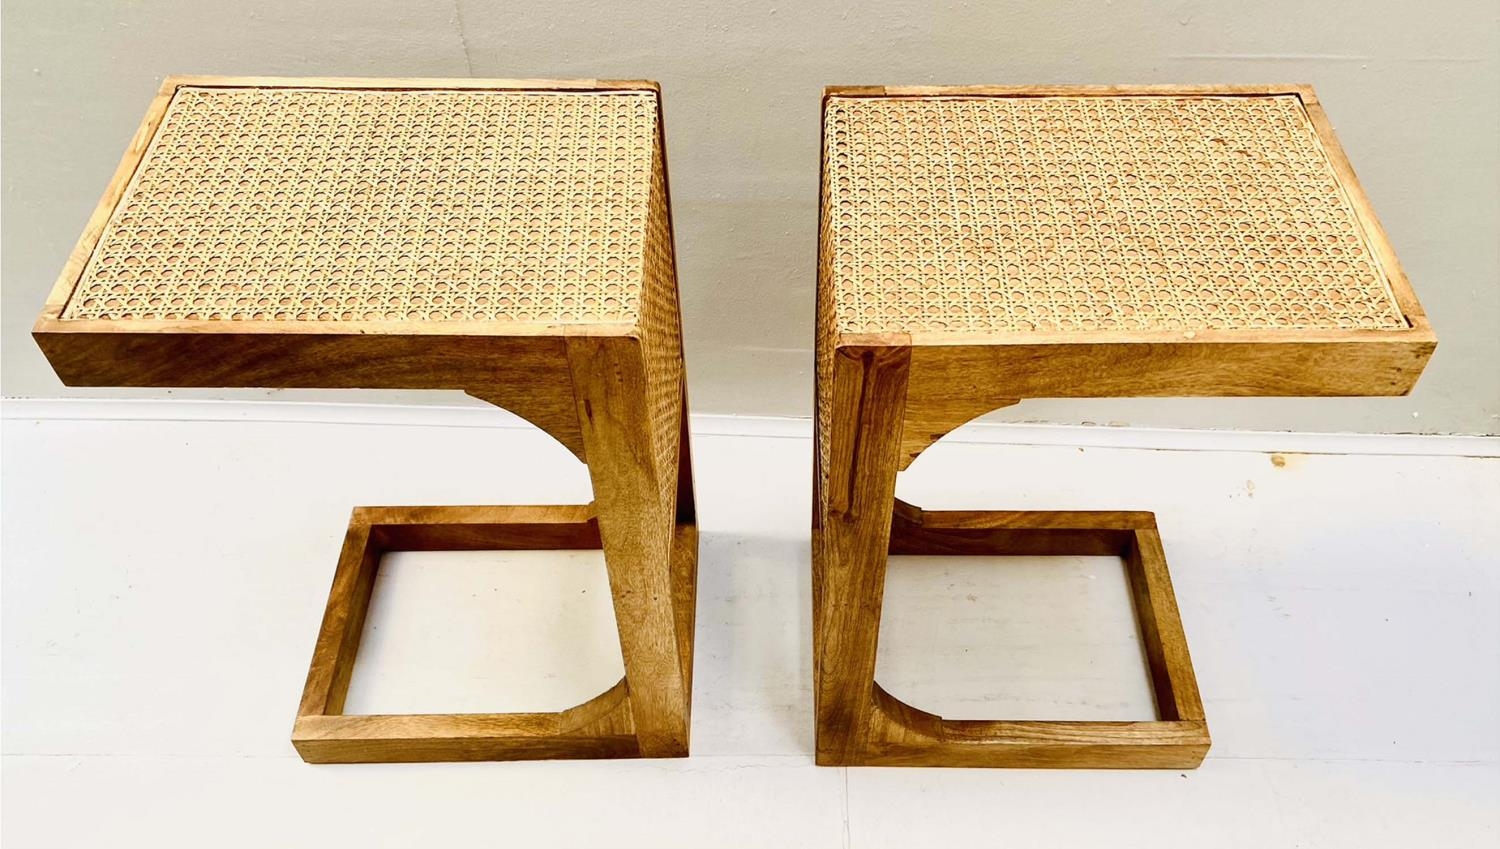 SIDE TABLES, a pair, 1970's Danish style, in wood and rattan, 60cm H x 30cm x 40cm. (2)